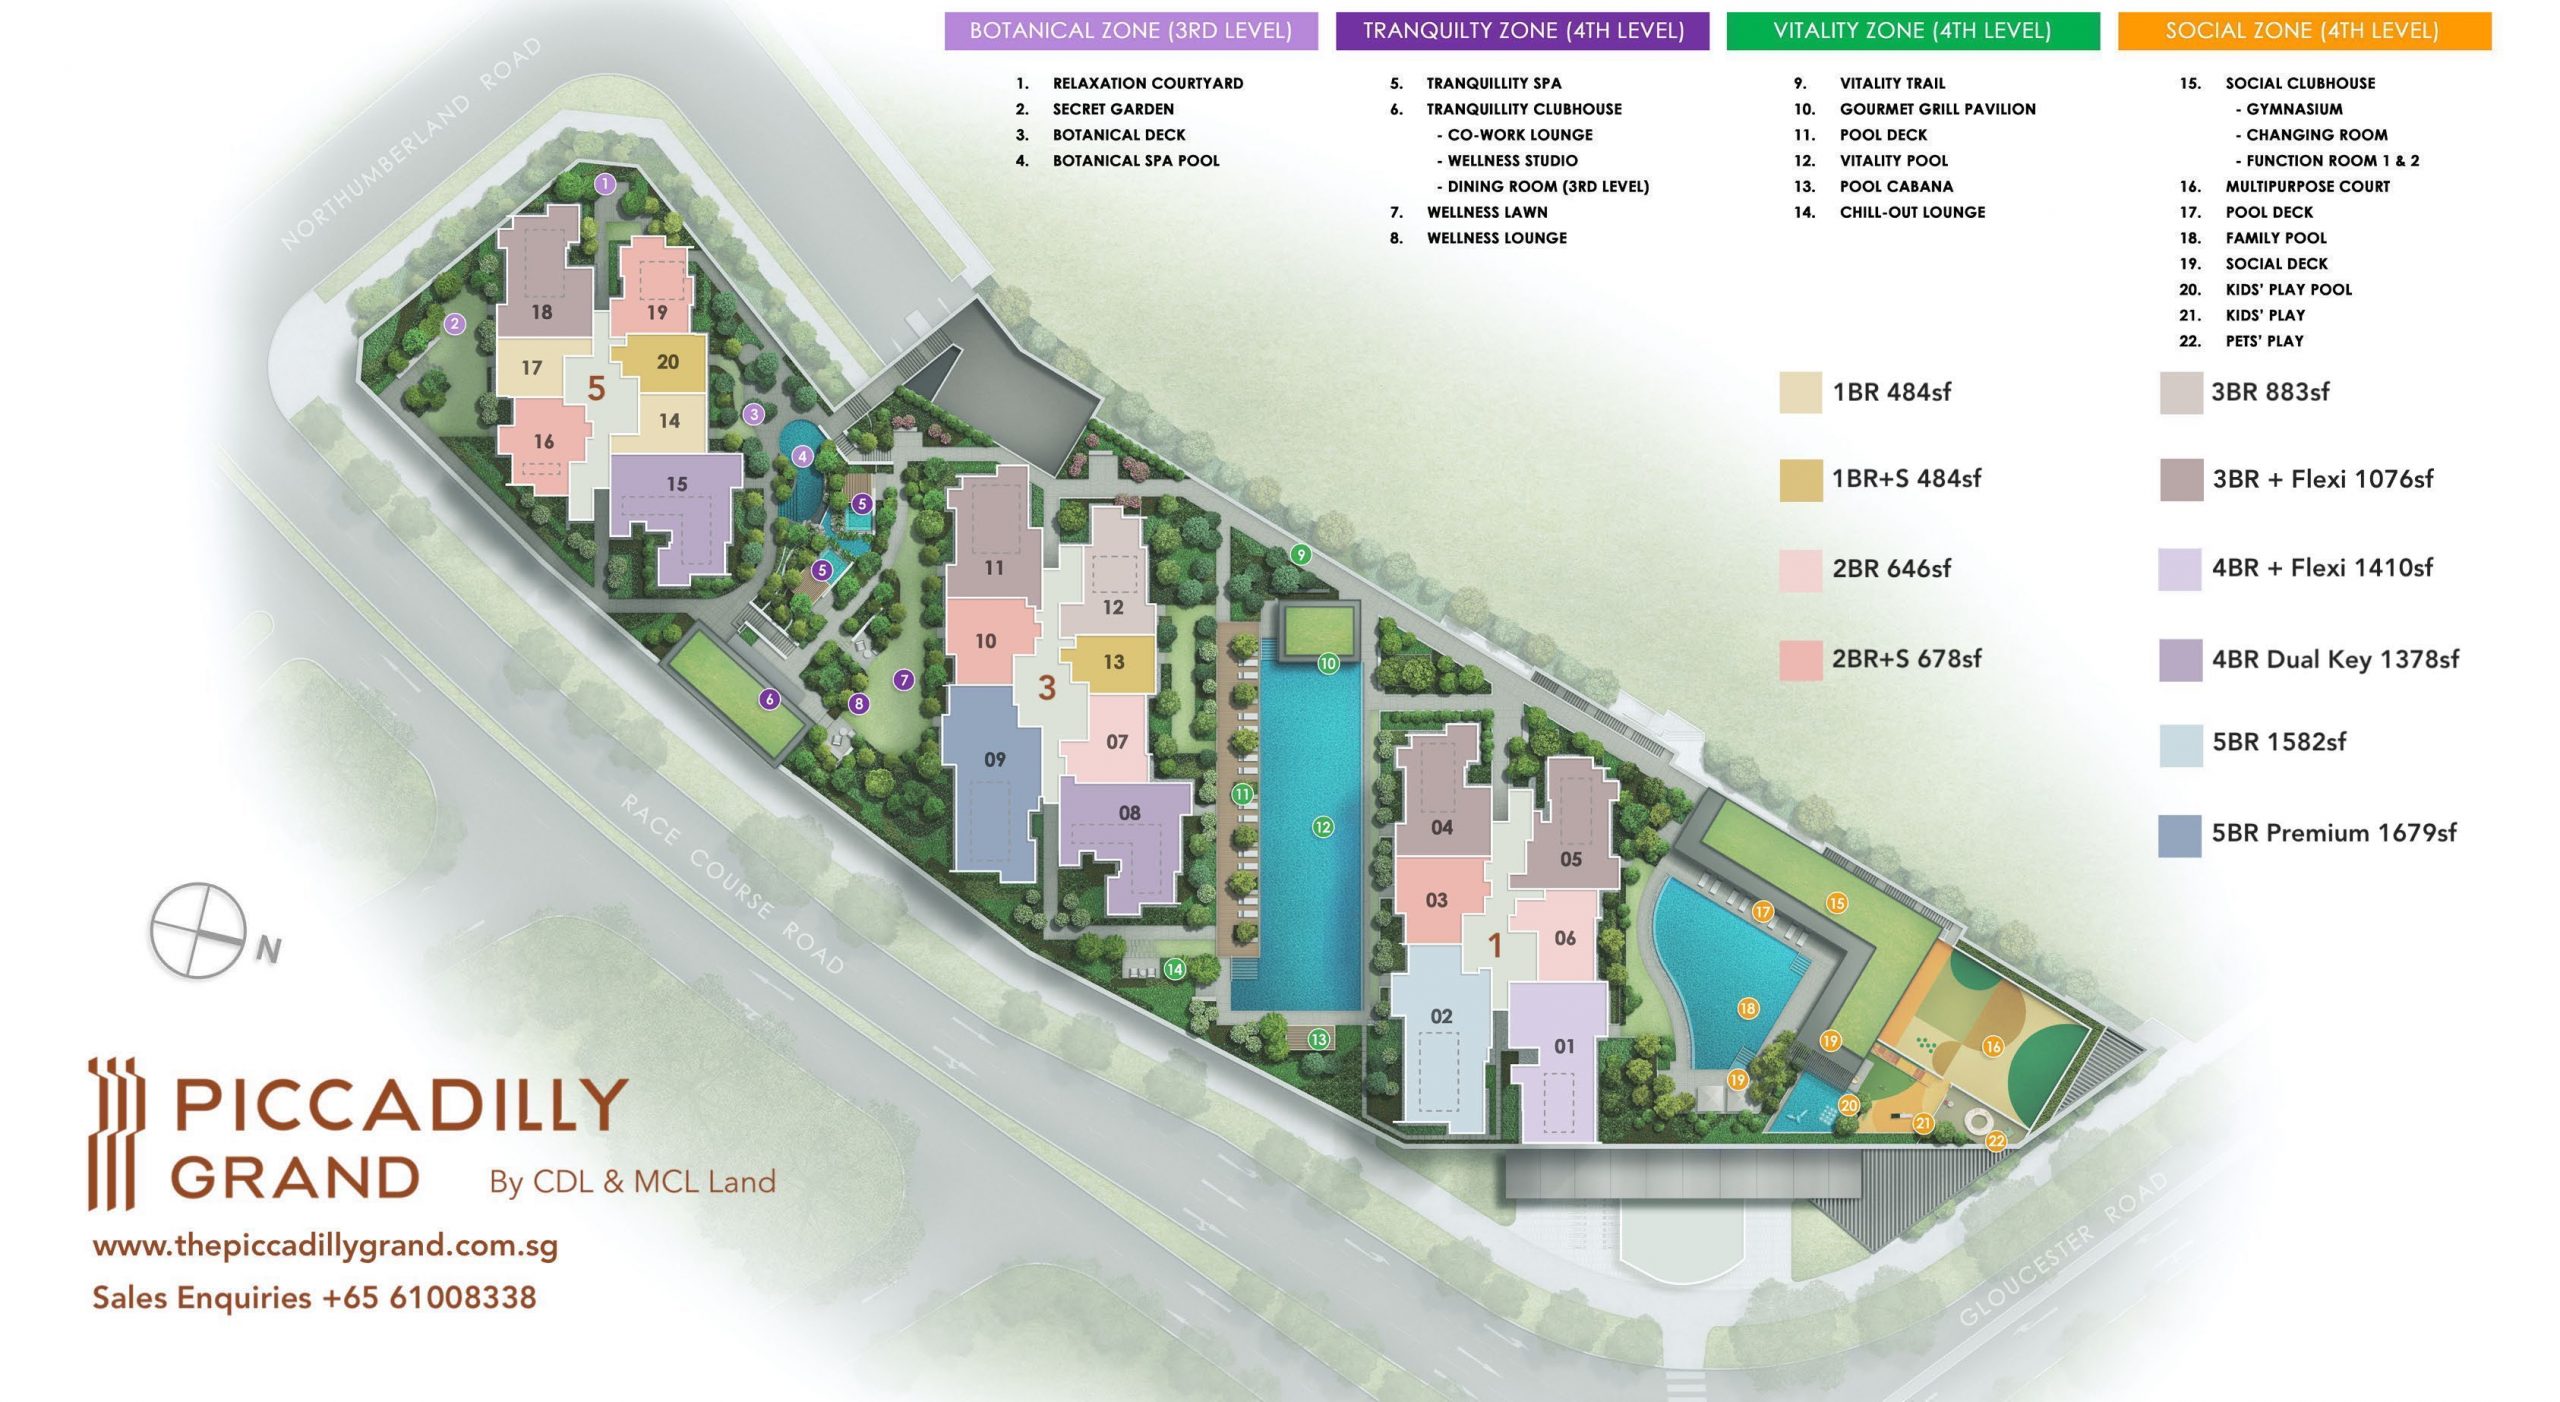 Piccadilly Grand Site Plan 